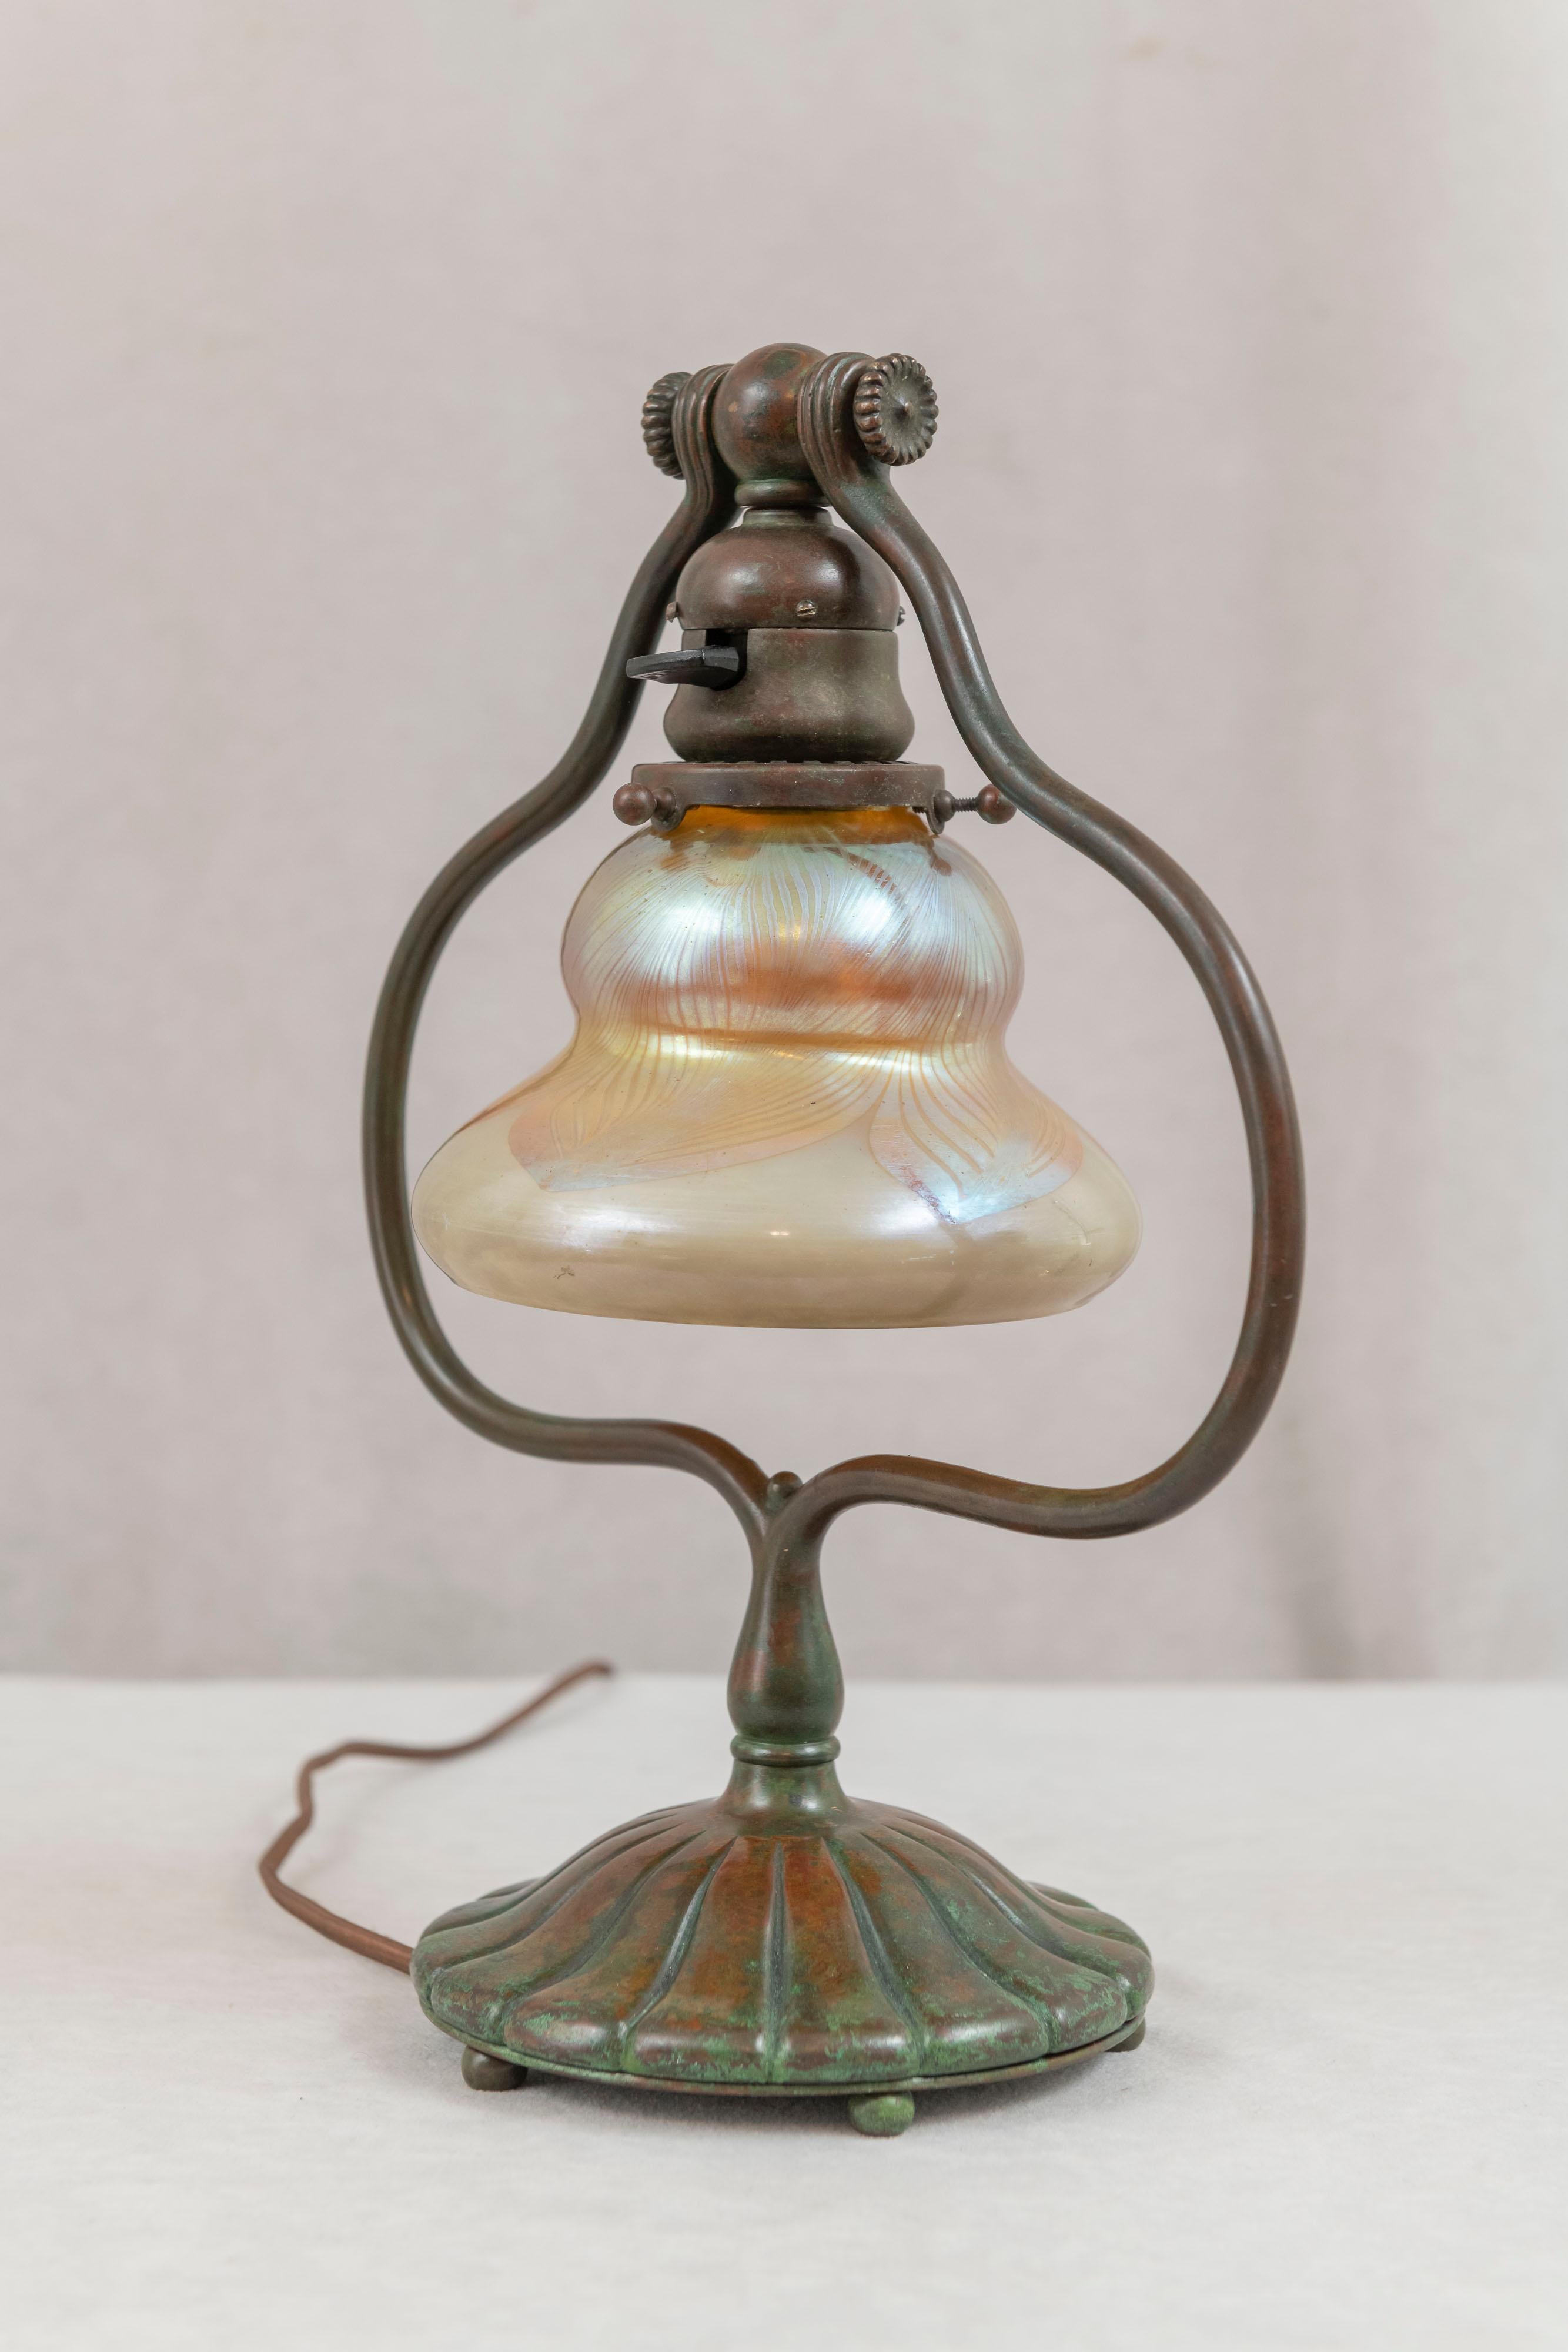 Hand-Crafted Tiffany & Co. Studios Harp Lamp W/ Pulled Feather Art Glass Shade, Ca. 1905